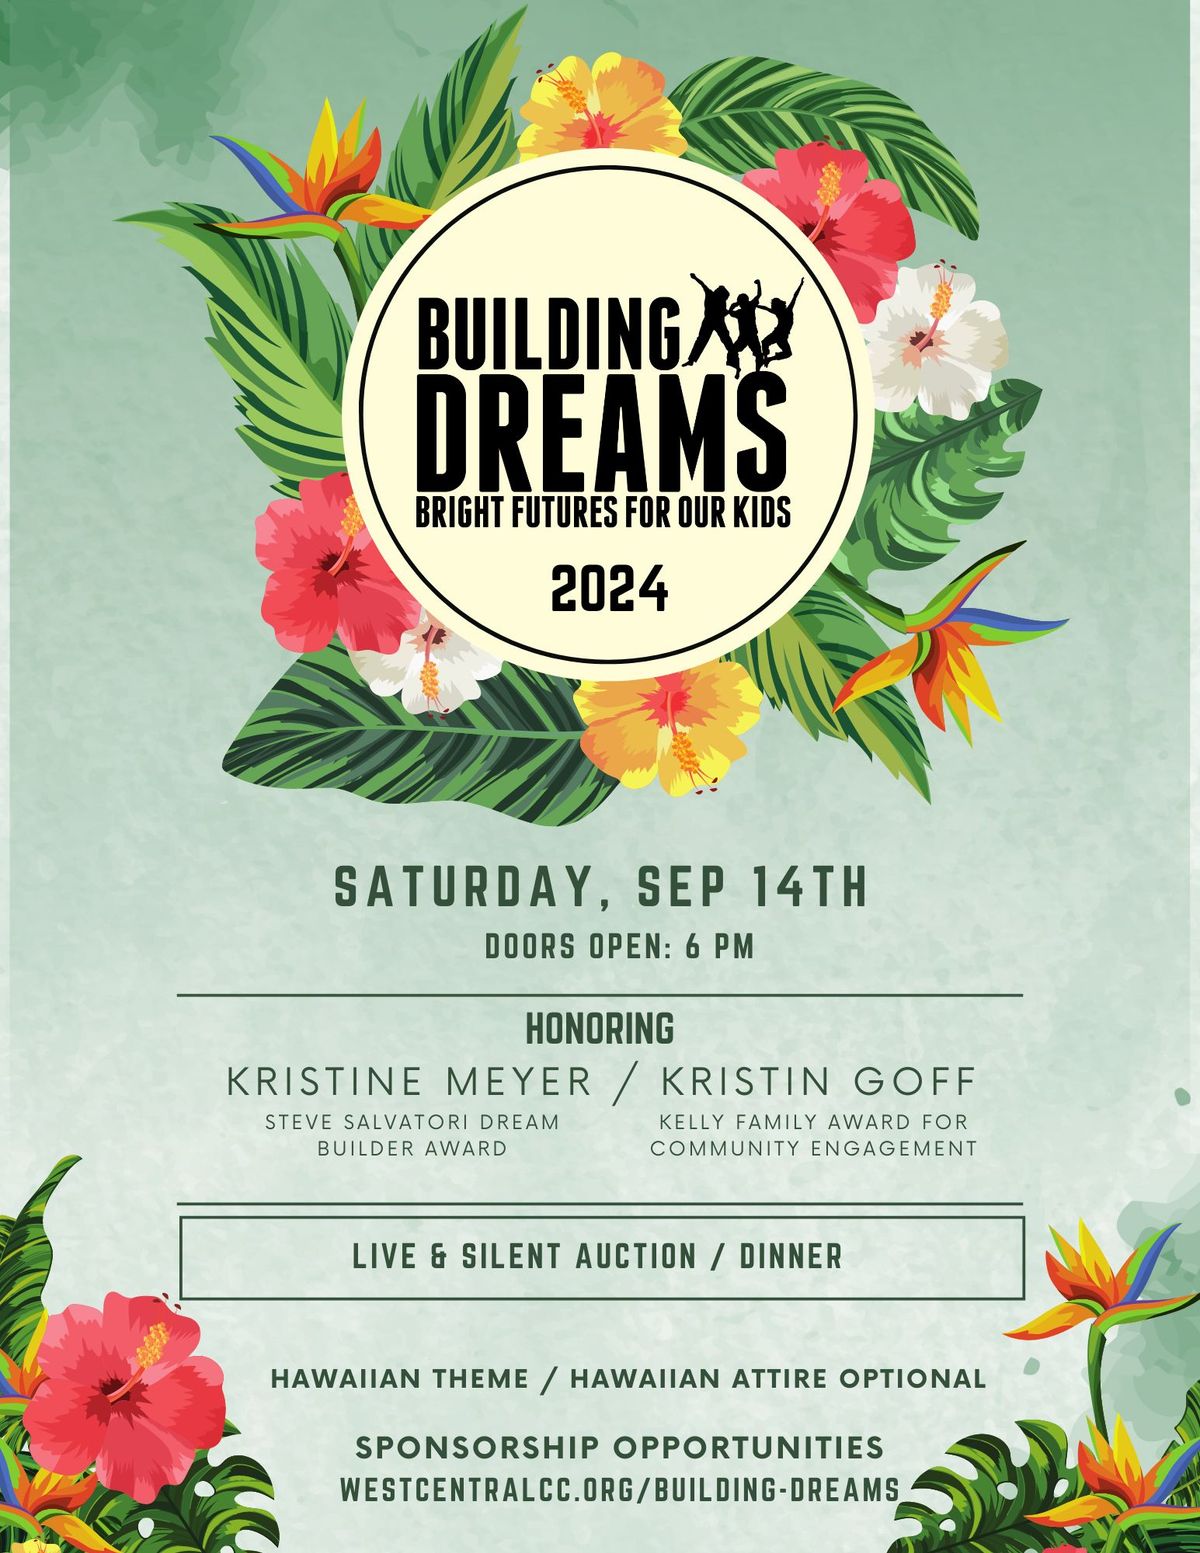 Building Dreams - Bright Futures for Our Kids 2024